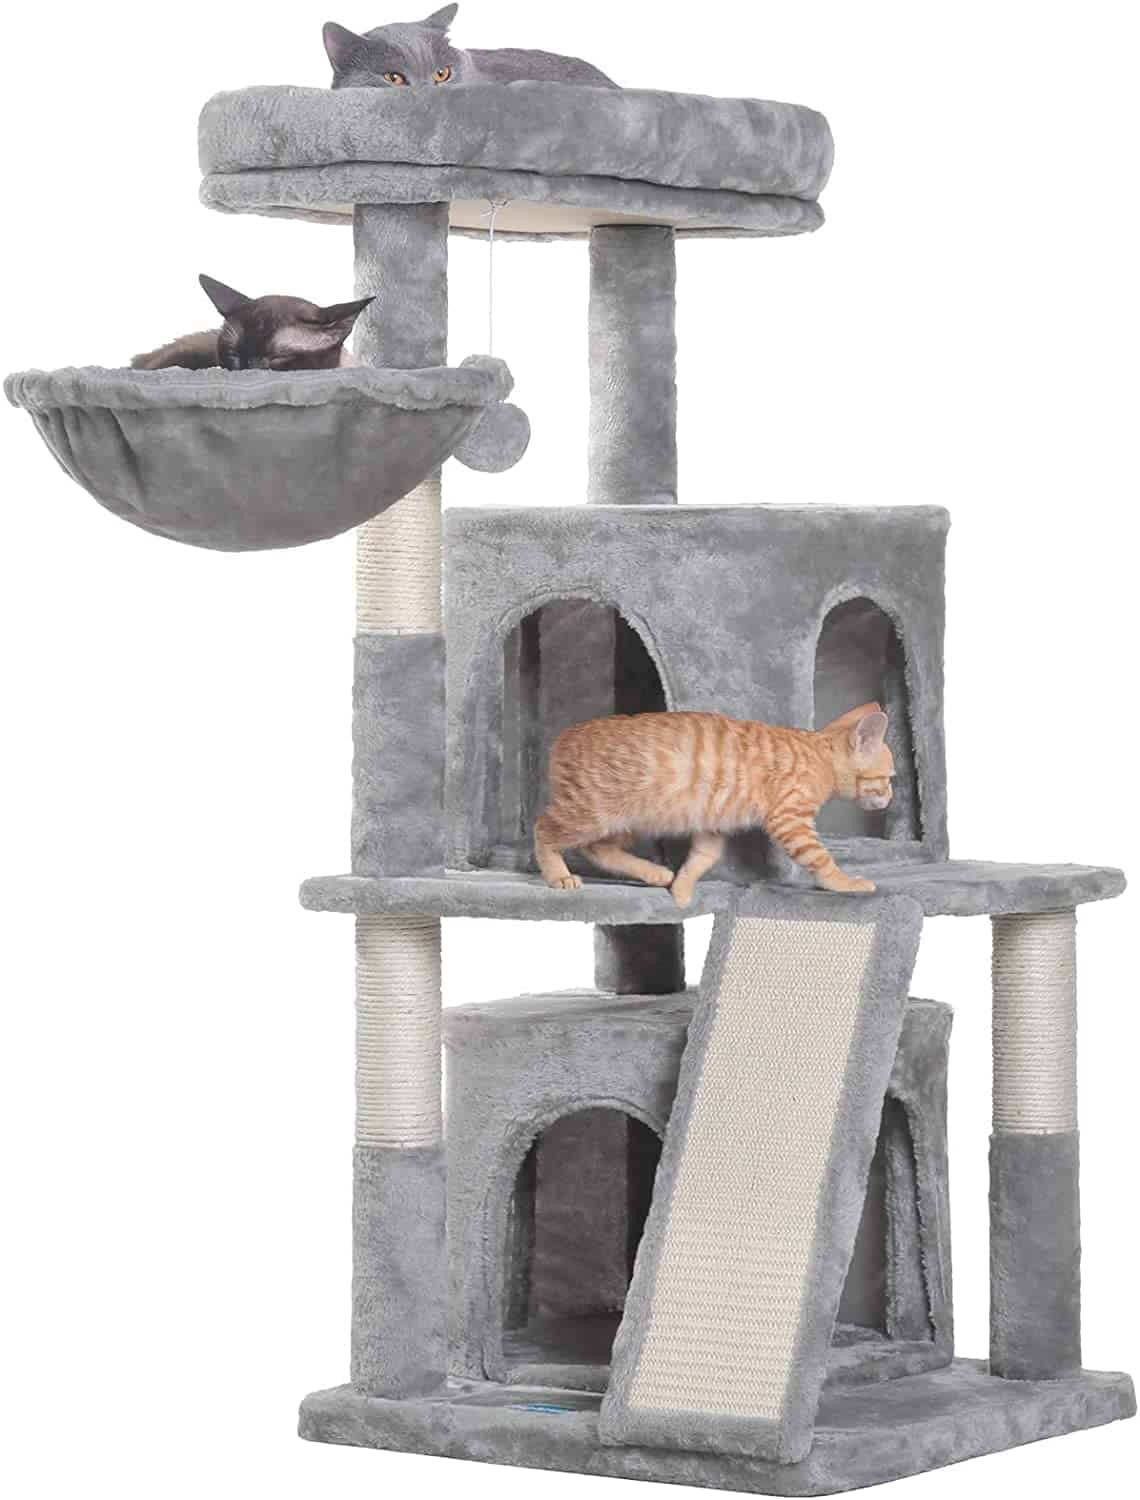 Several cats lounge and play on a plush cat tree